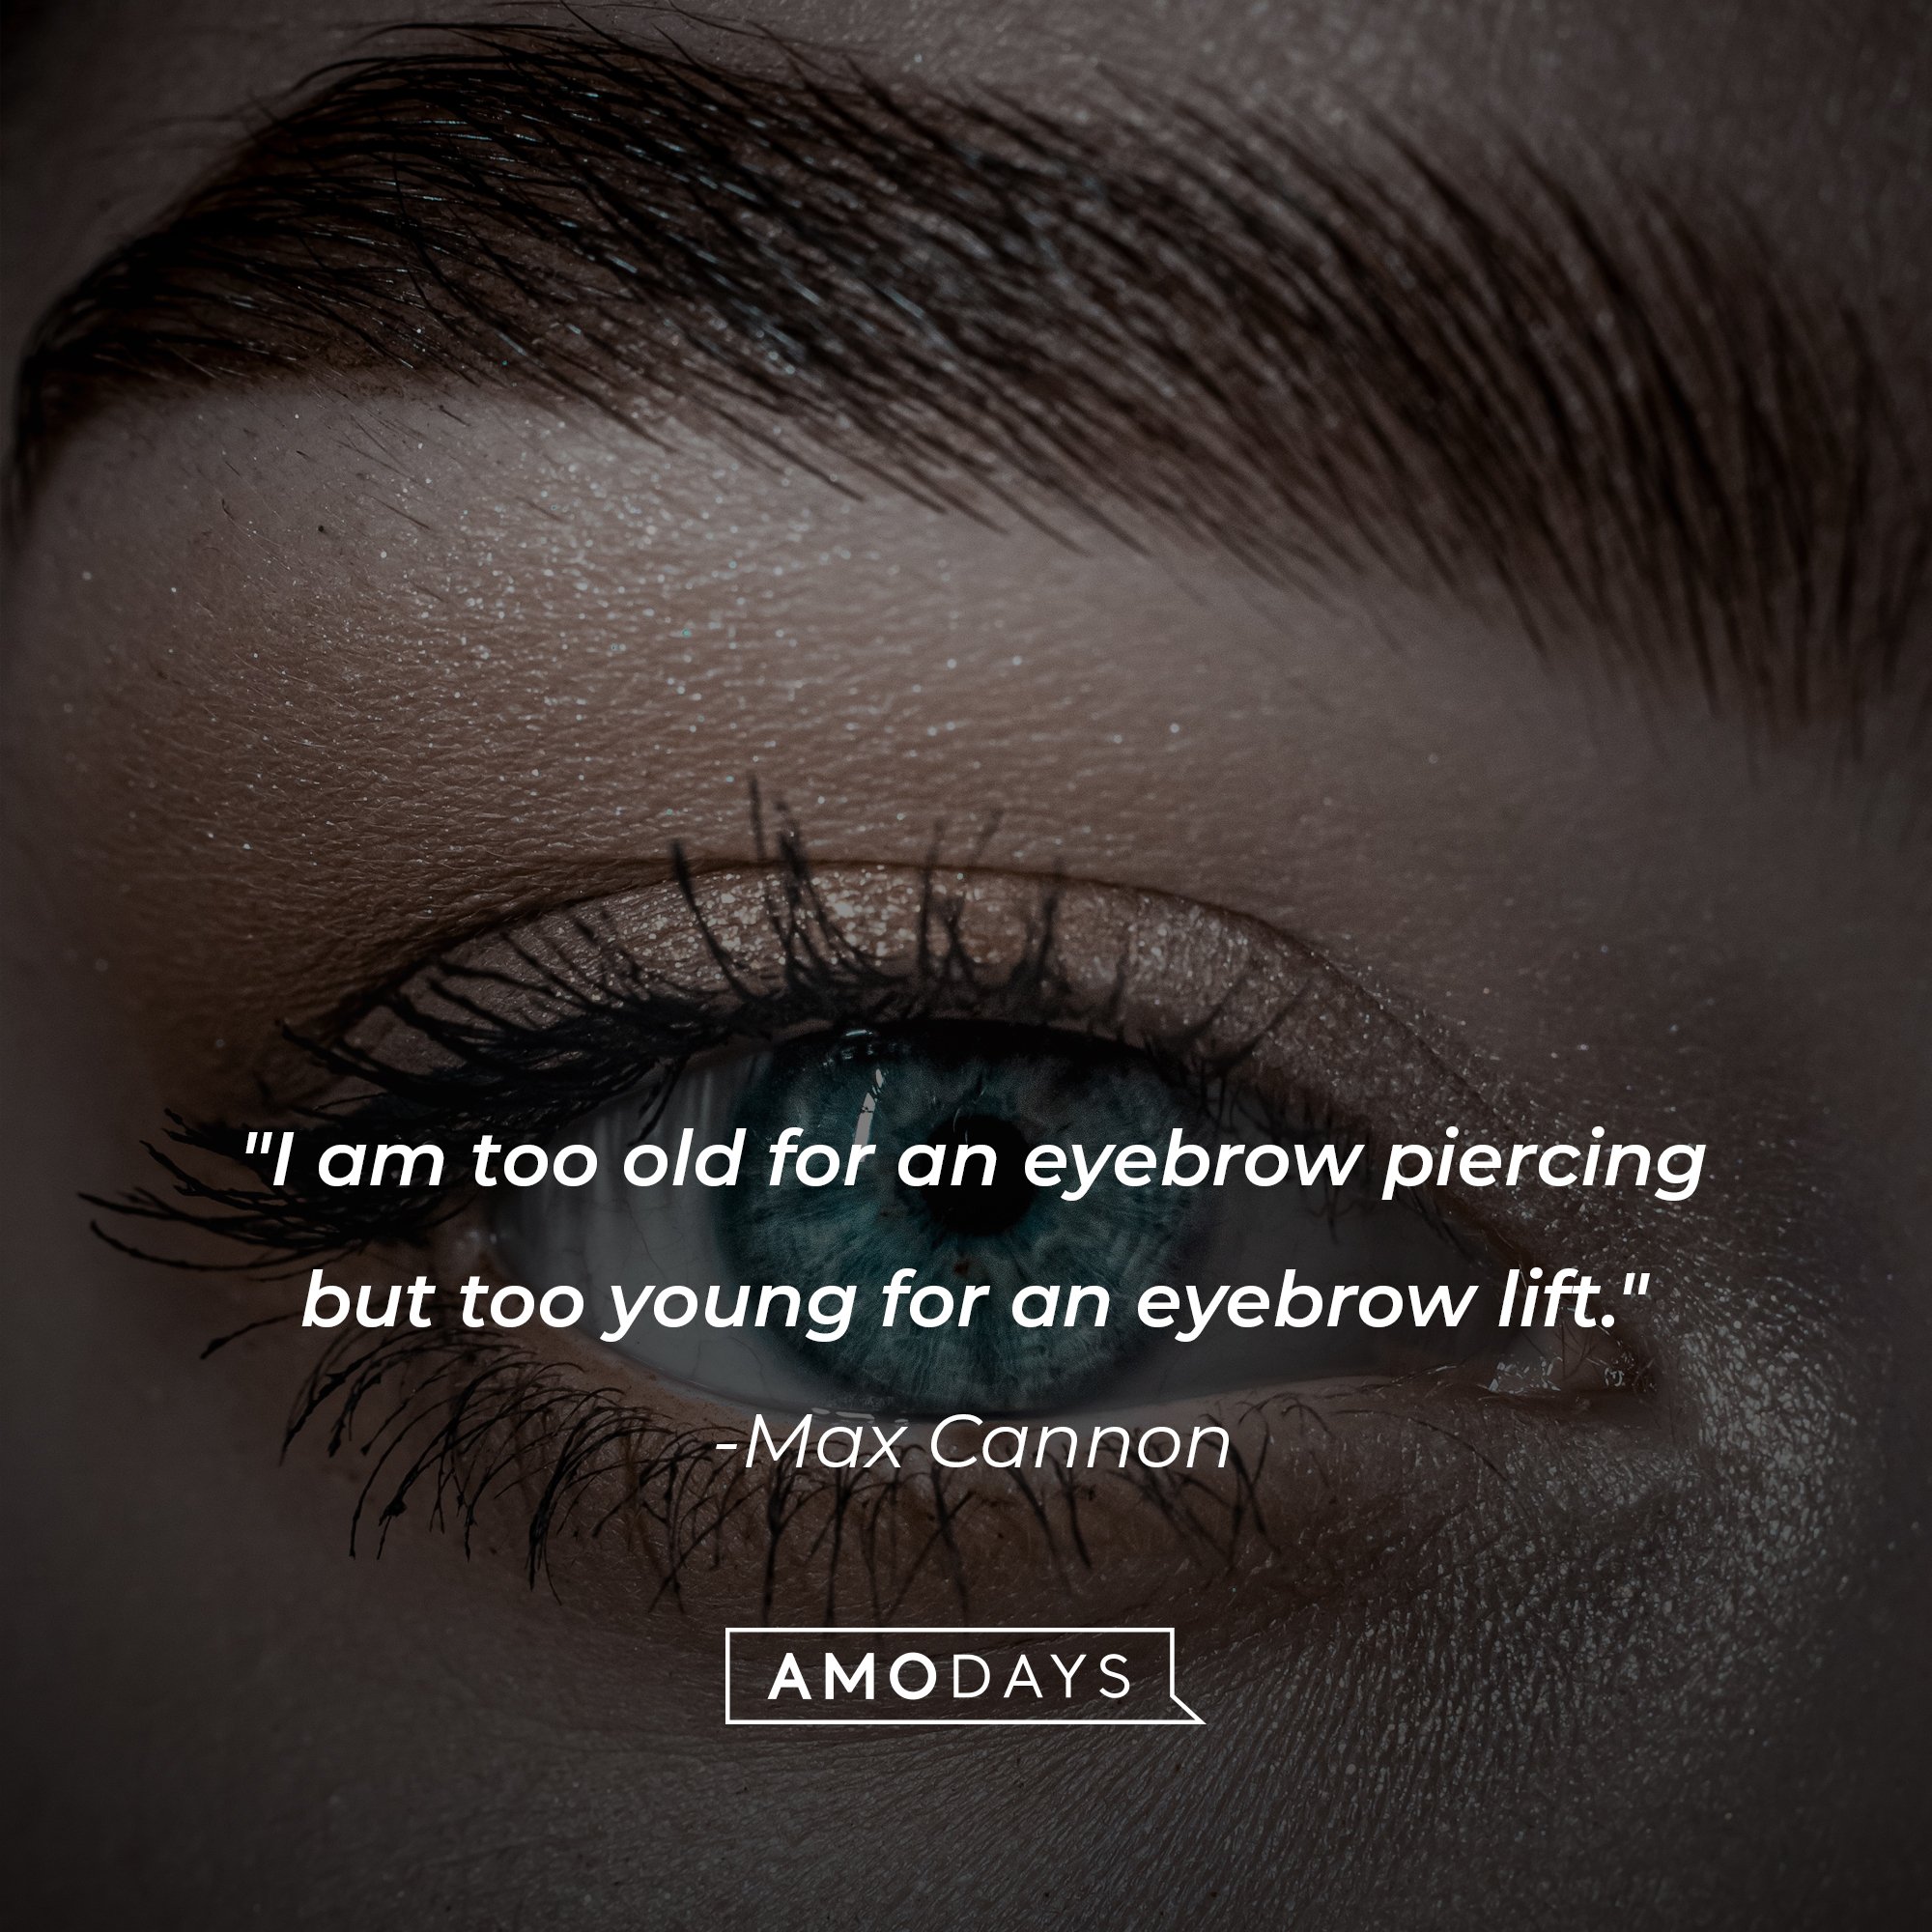 Max Cannon’s quote: "I am too old for an eyebrow piercing but too young for an eyebrow lift." | Image: AmoDays  